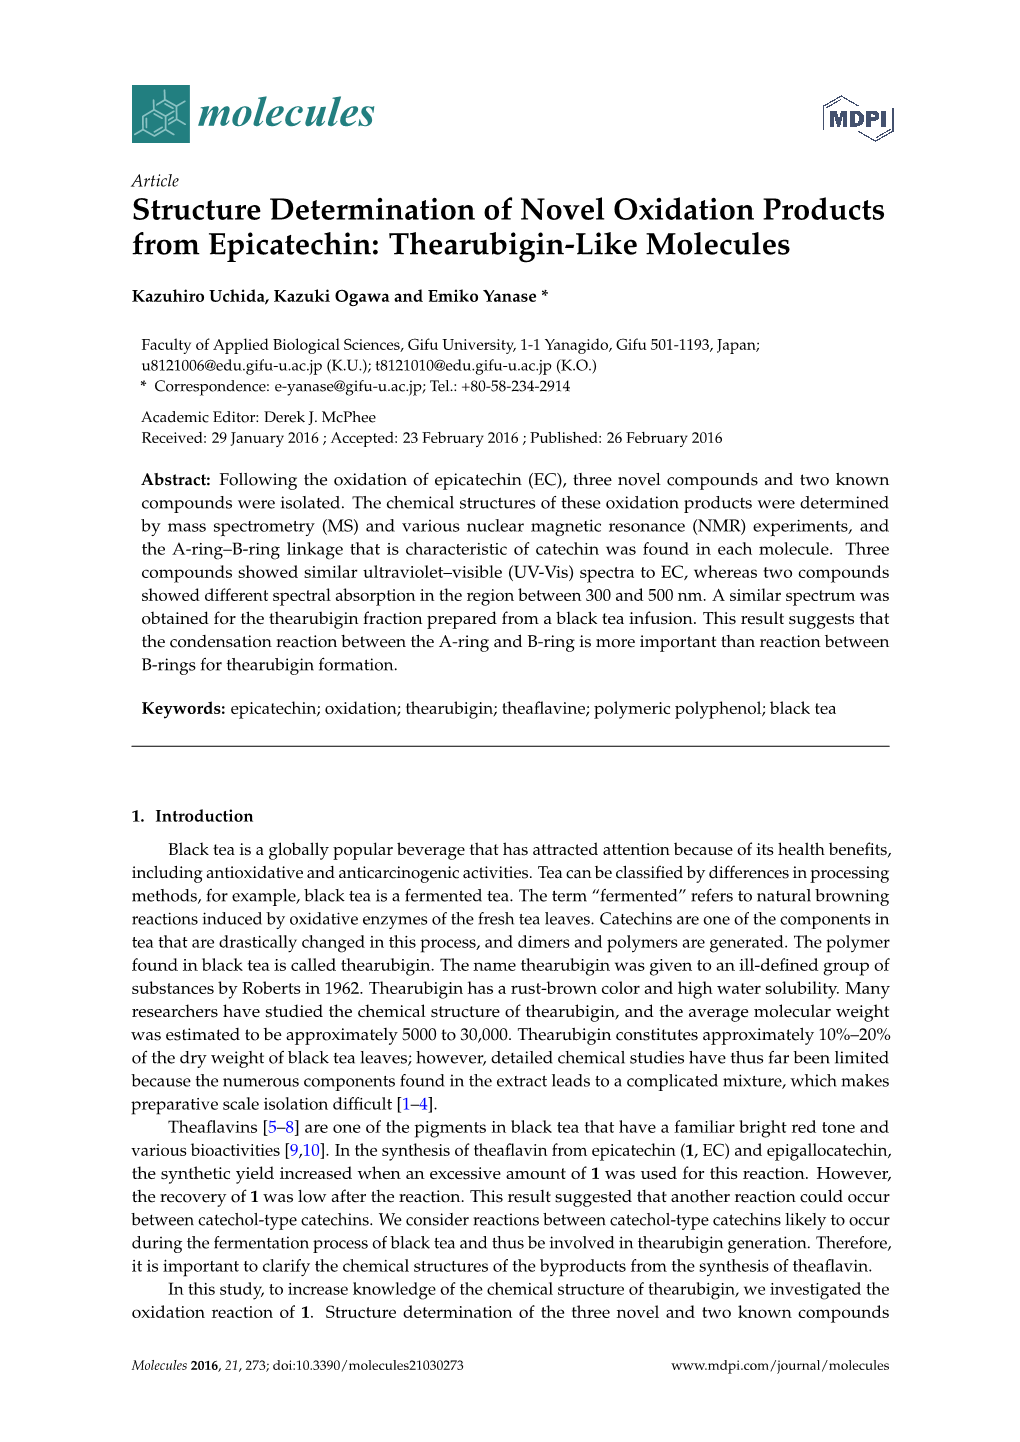 Structure Determination of Novel Oxidation Products from Epicatechin: Thearubigin-Like Molecules